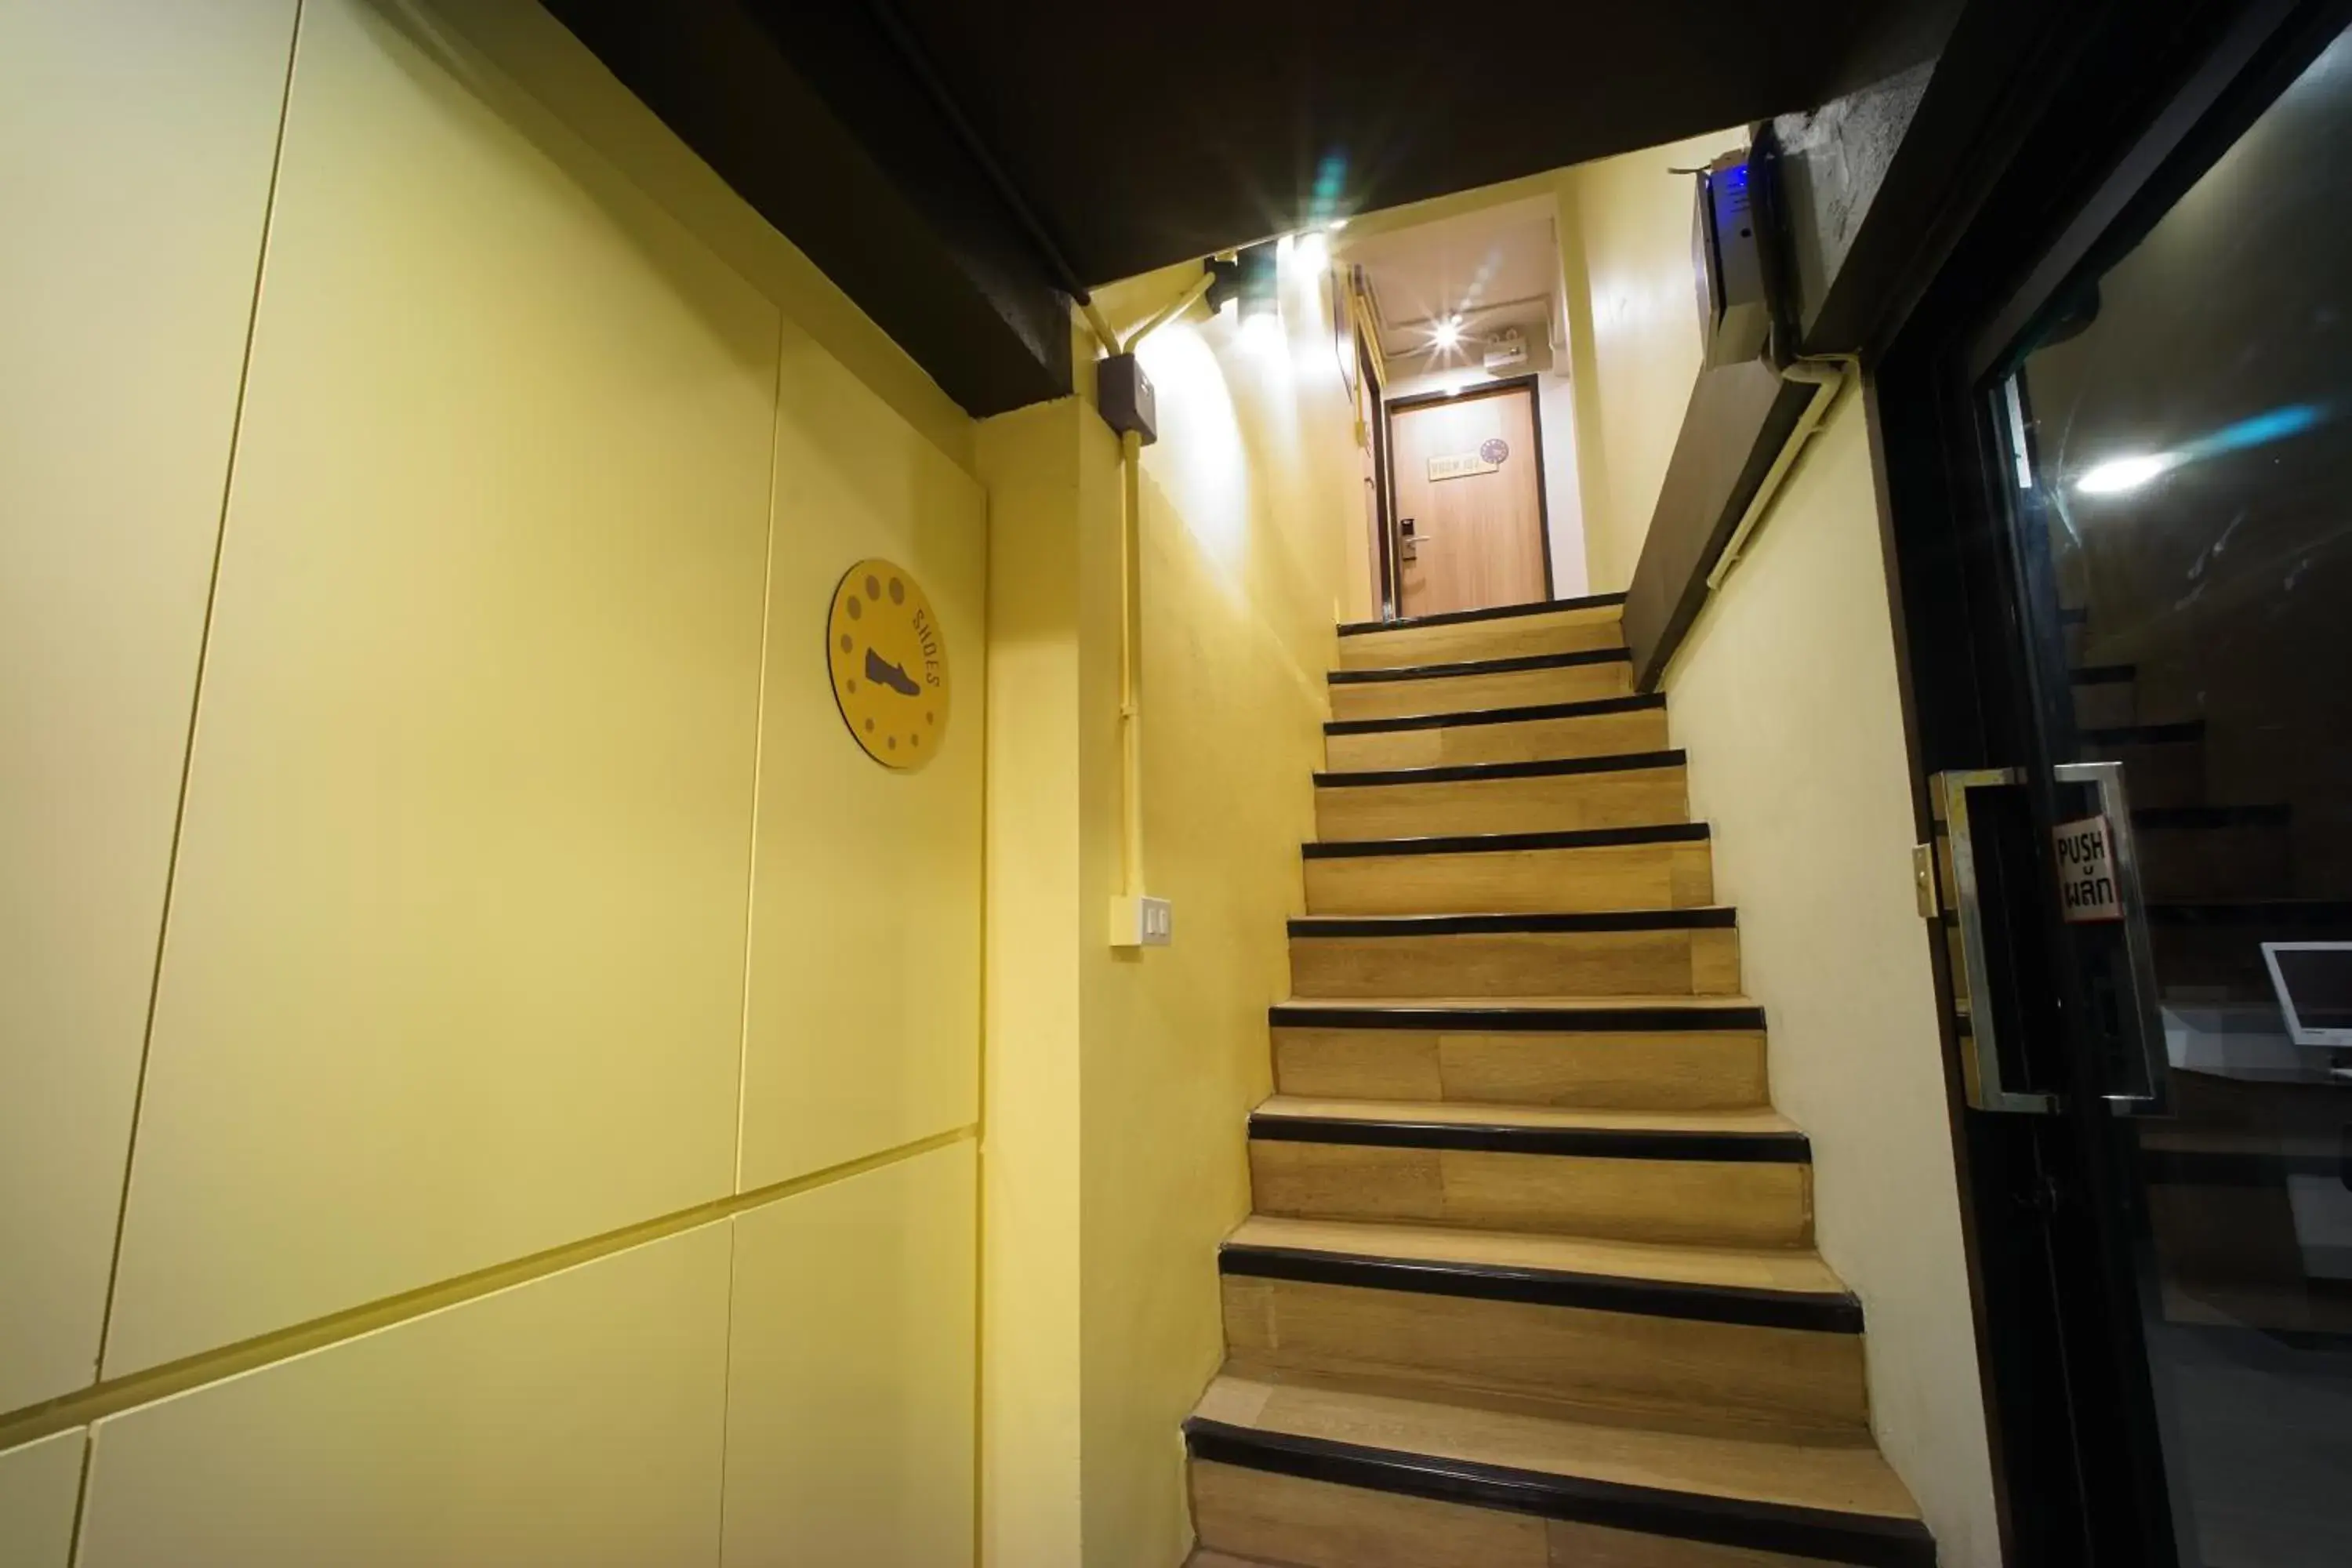 Area and facilities in BRB Hostel Bangkok Silom